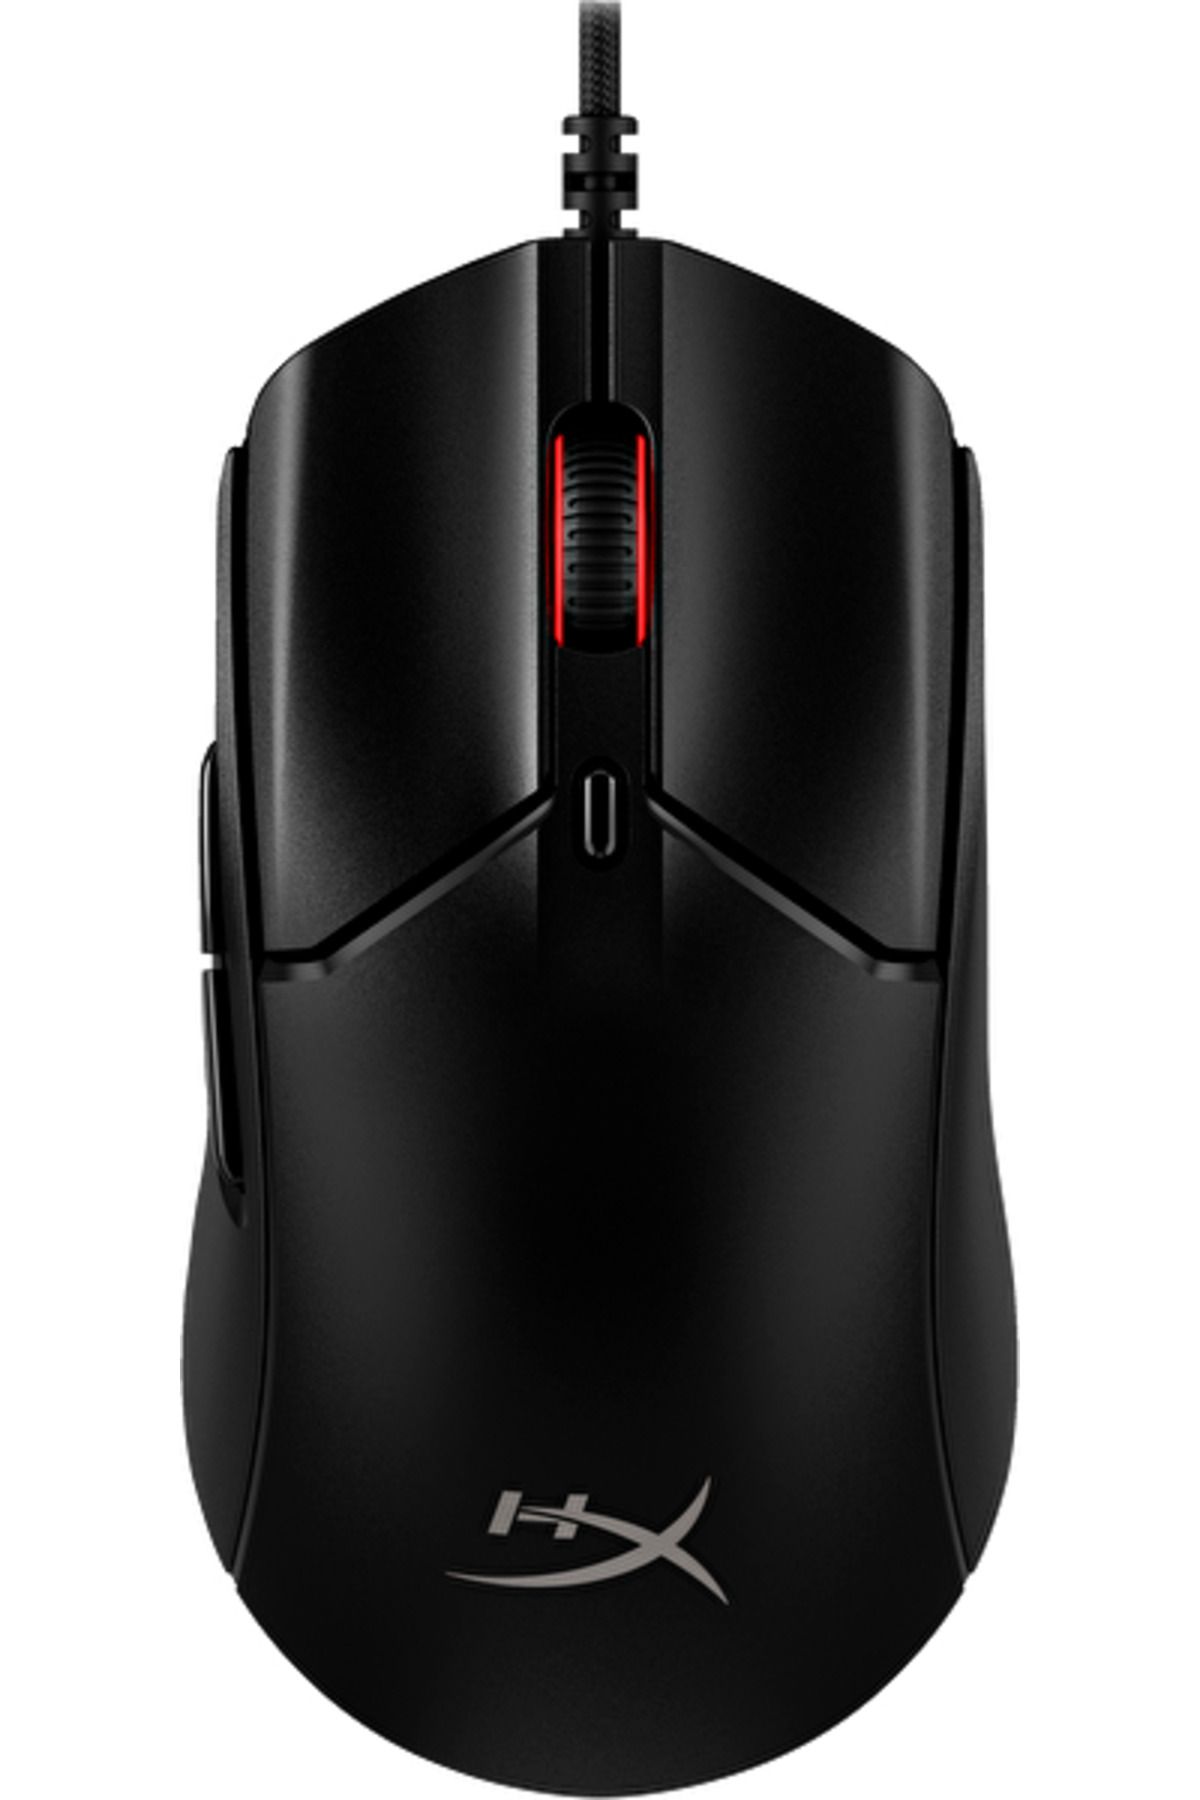 HyperX 6n0a7aa Pulsefire Haste 2 Black Wired Gaming Mouse